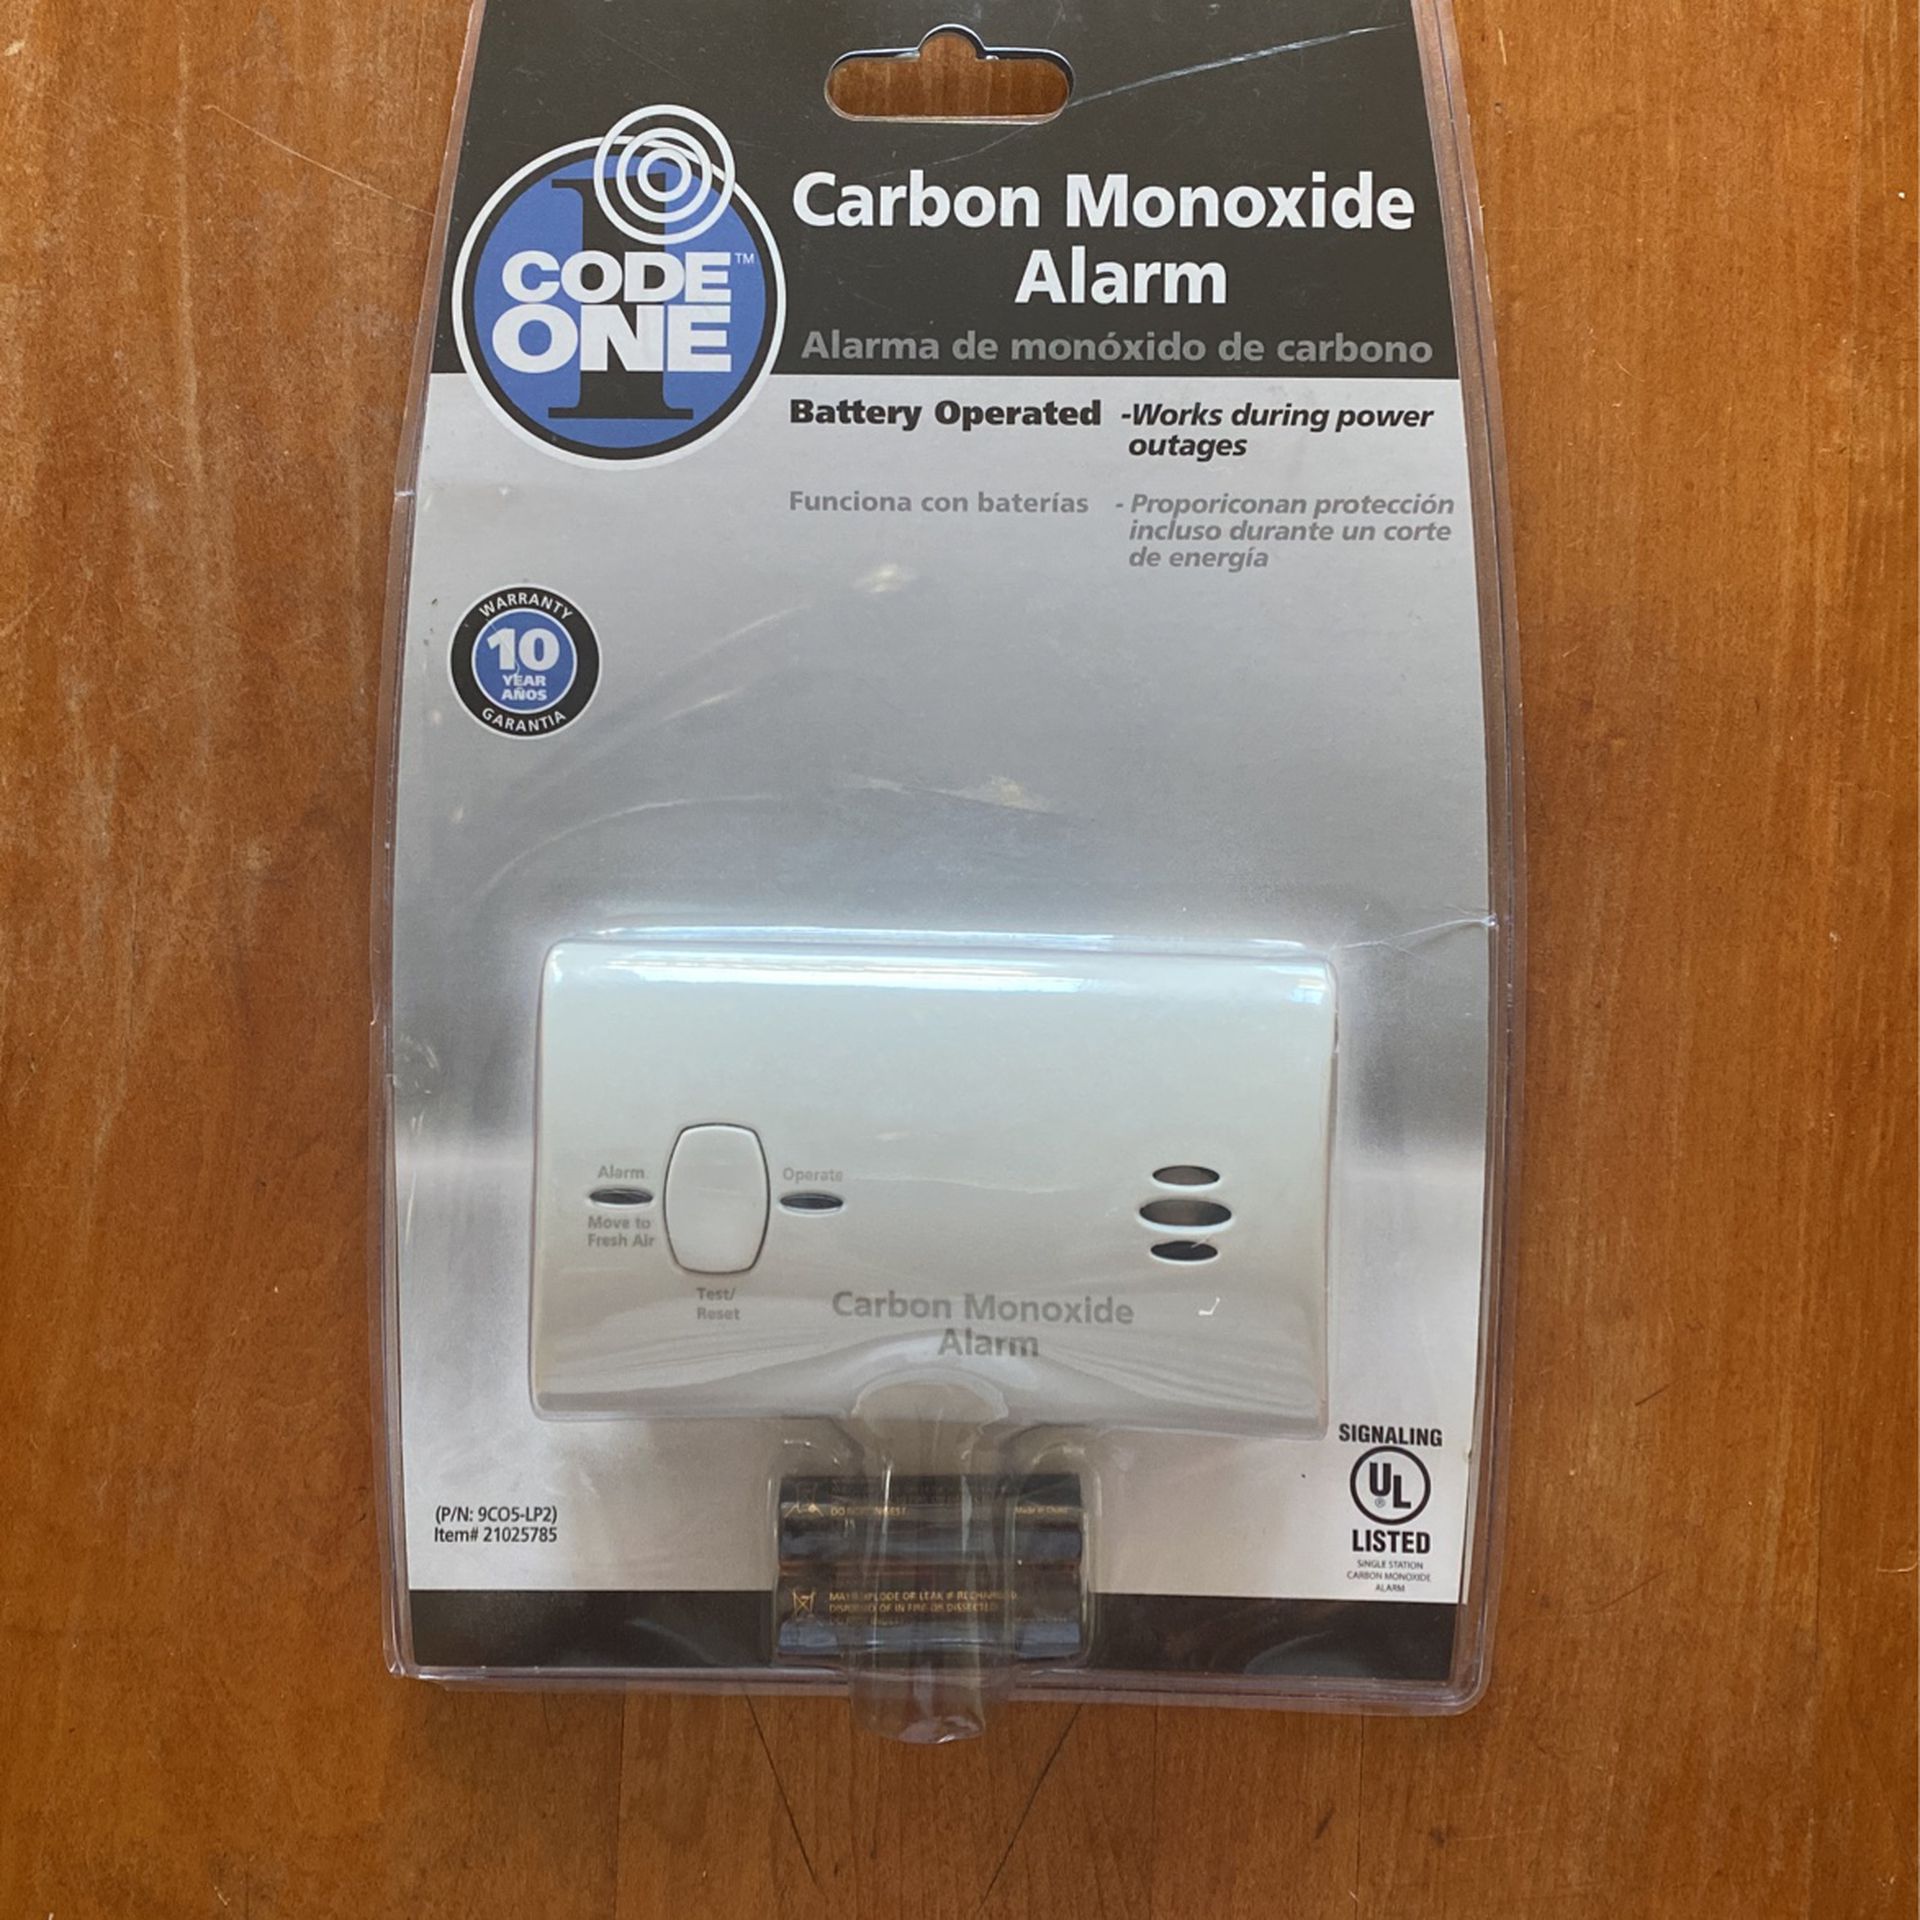 Code One Battery Operated Carbon Monoxide Alarm